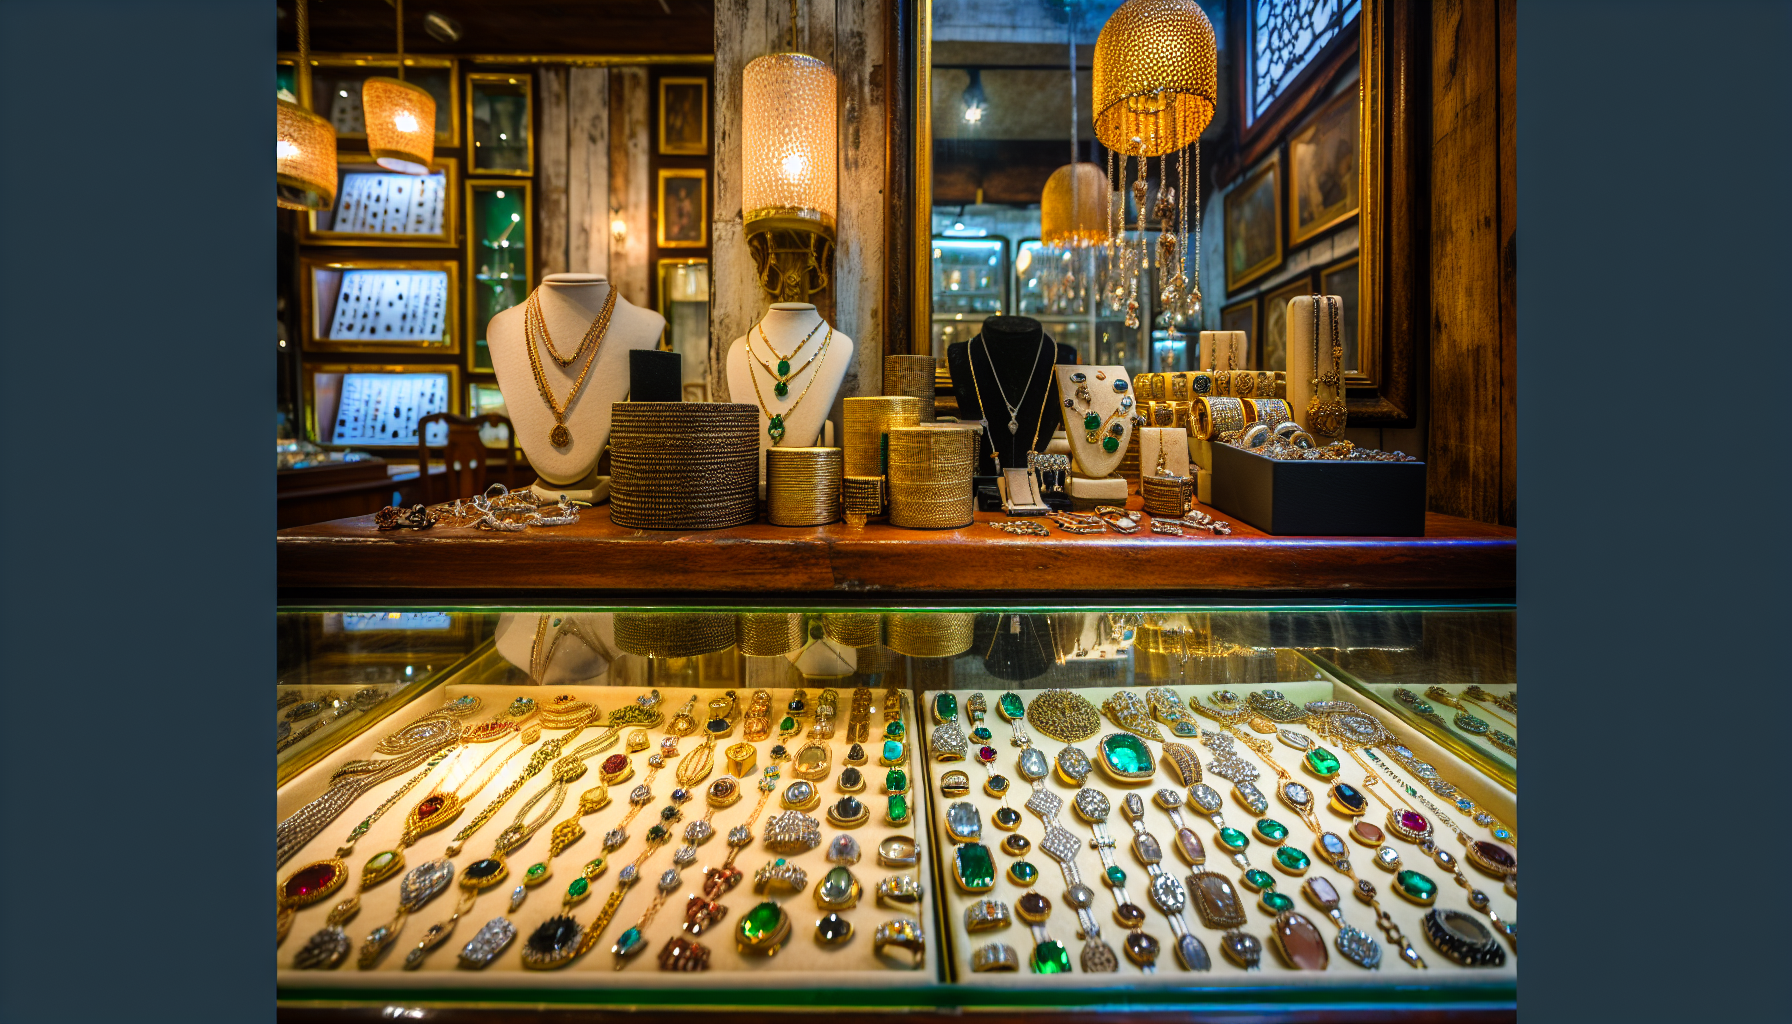 A display of various jewelry items in a local jeweler's store